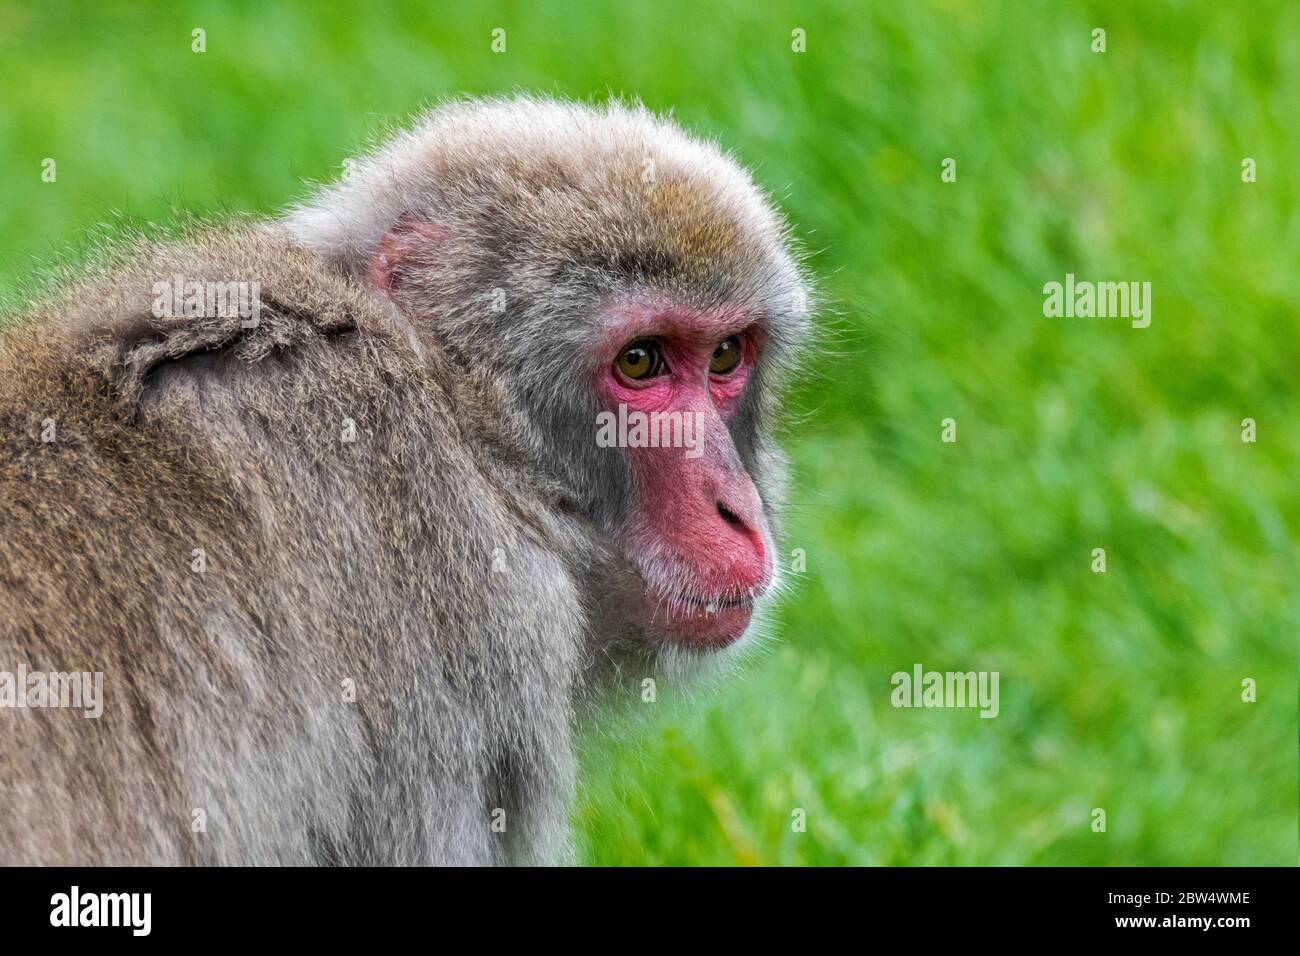 Japanese macaque / snow monkey (Macaca fuscata) close-up portrait, native to Japan Stock Photo